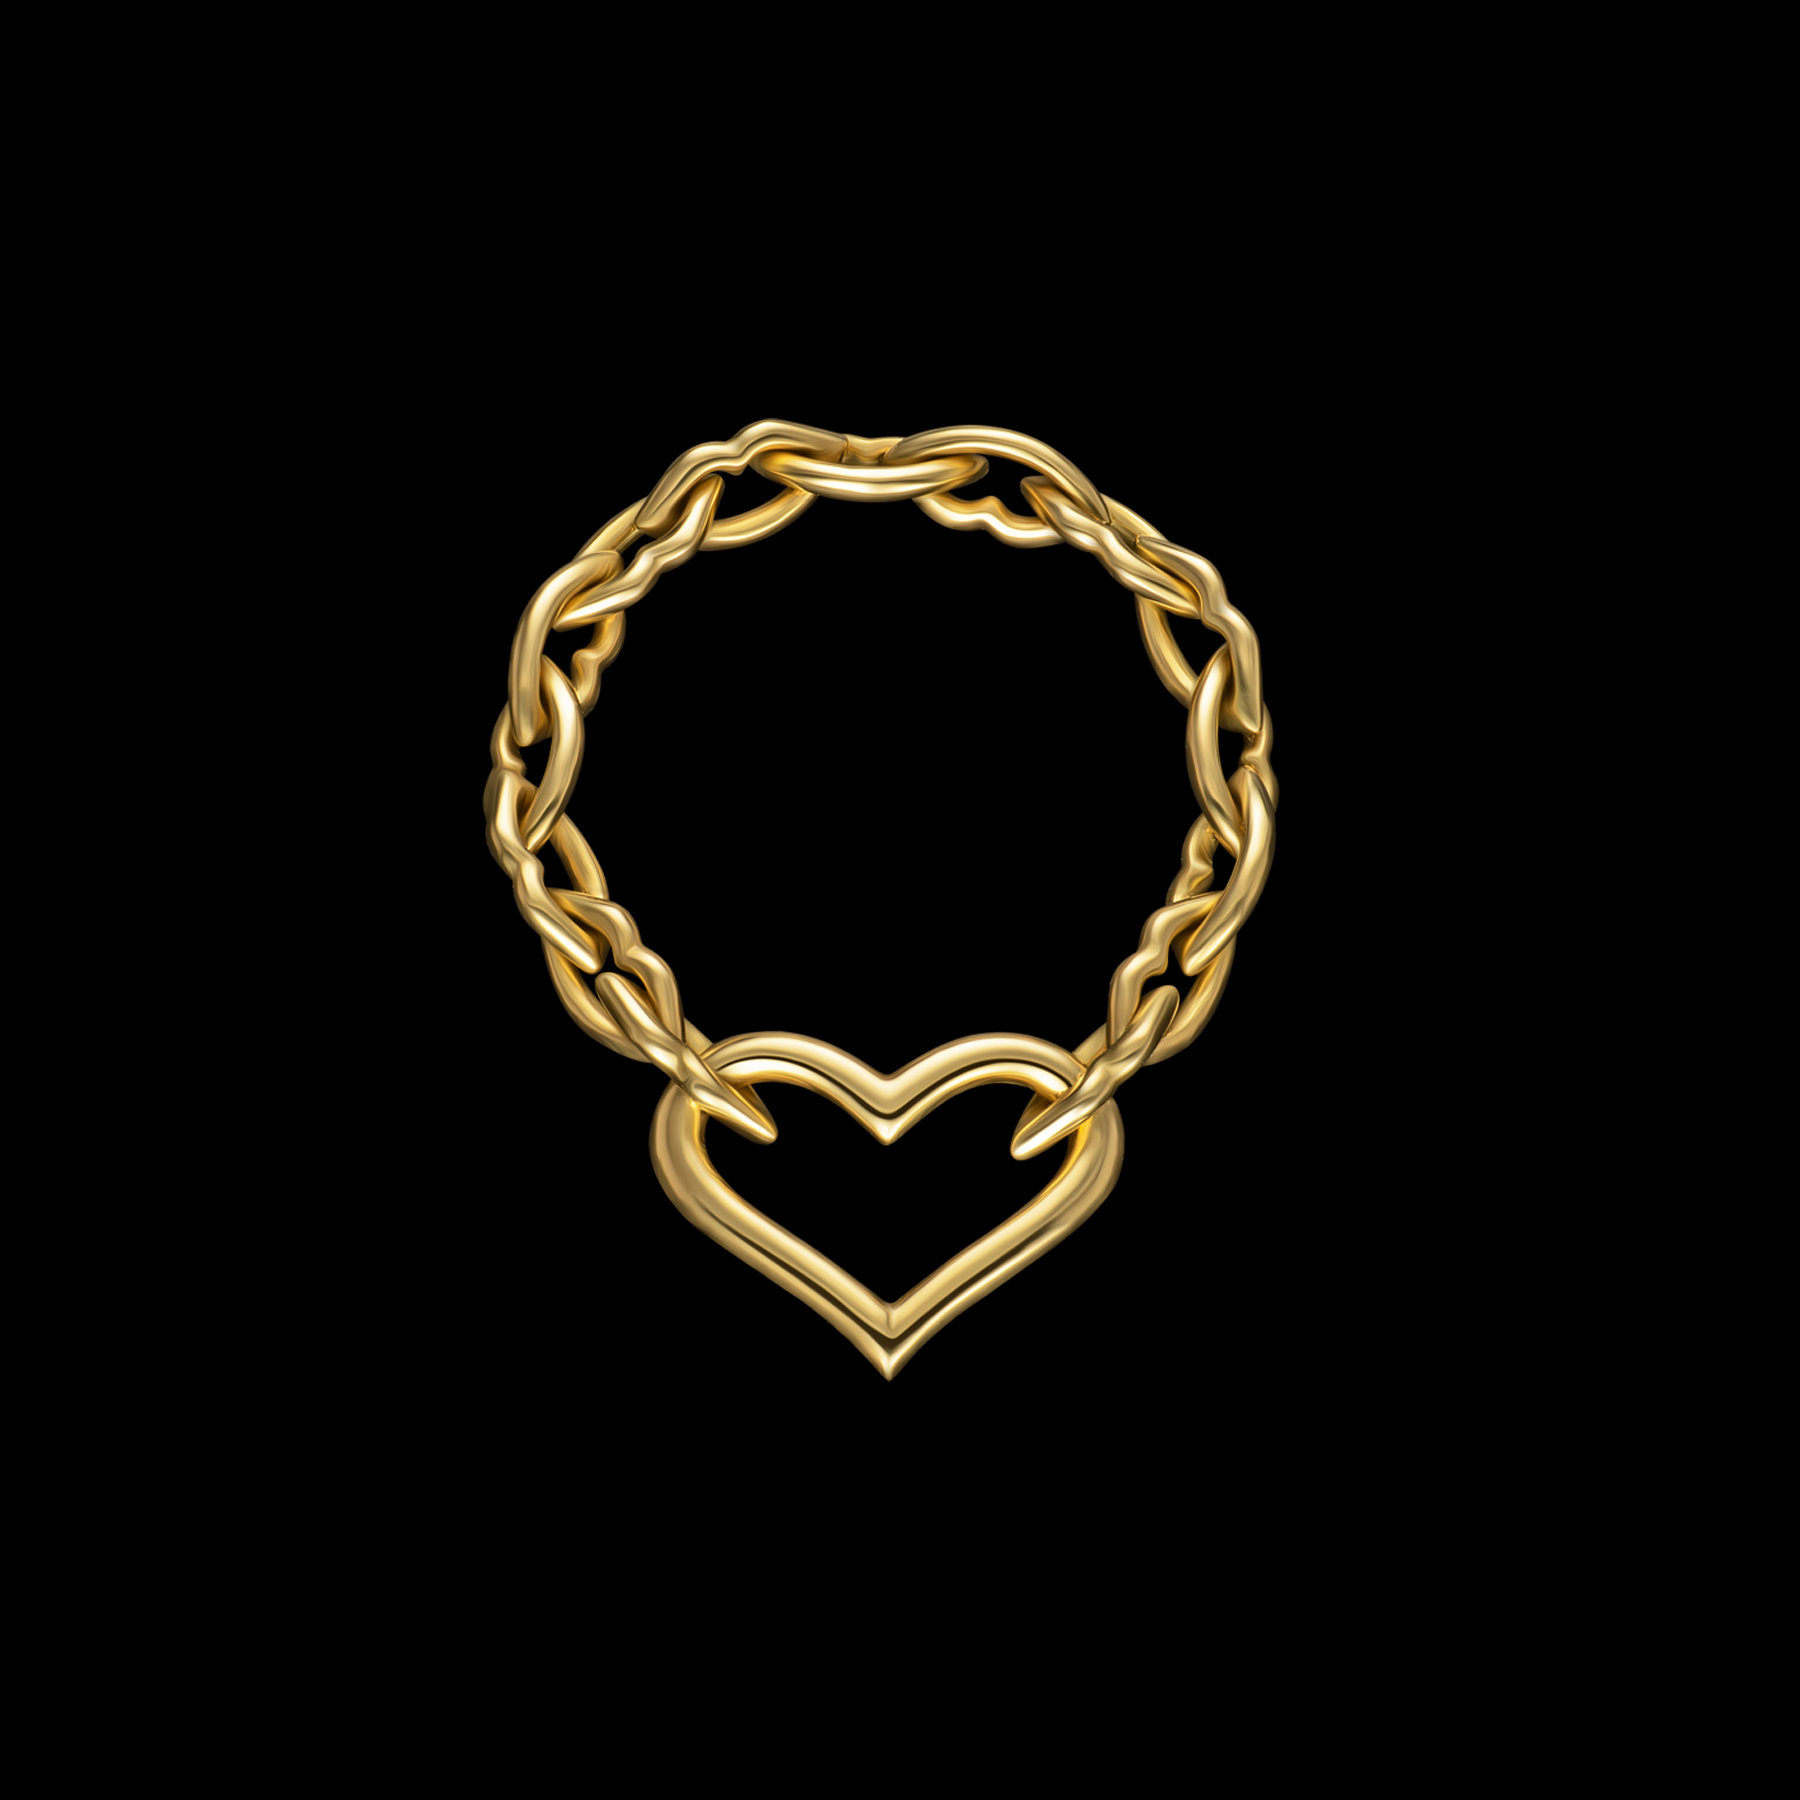 The Love and Kisses chain ring by designer Solange Azagury-Partridge - 18 carat Yellow Gold - front view